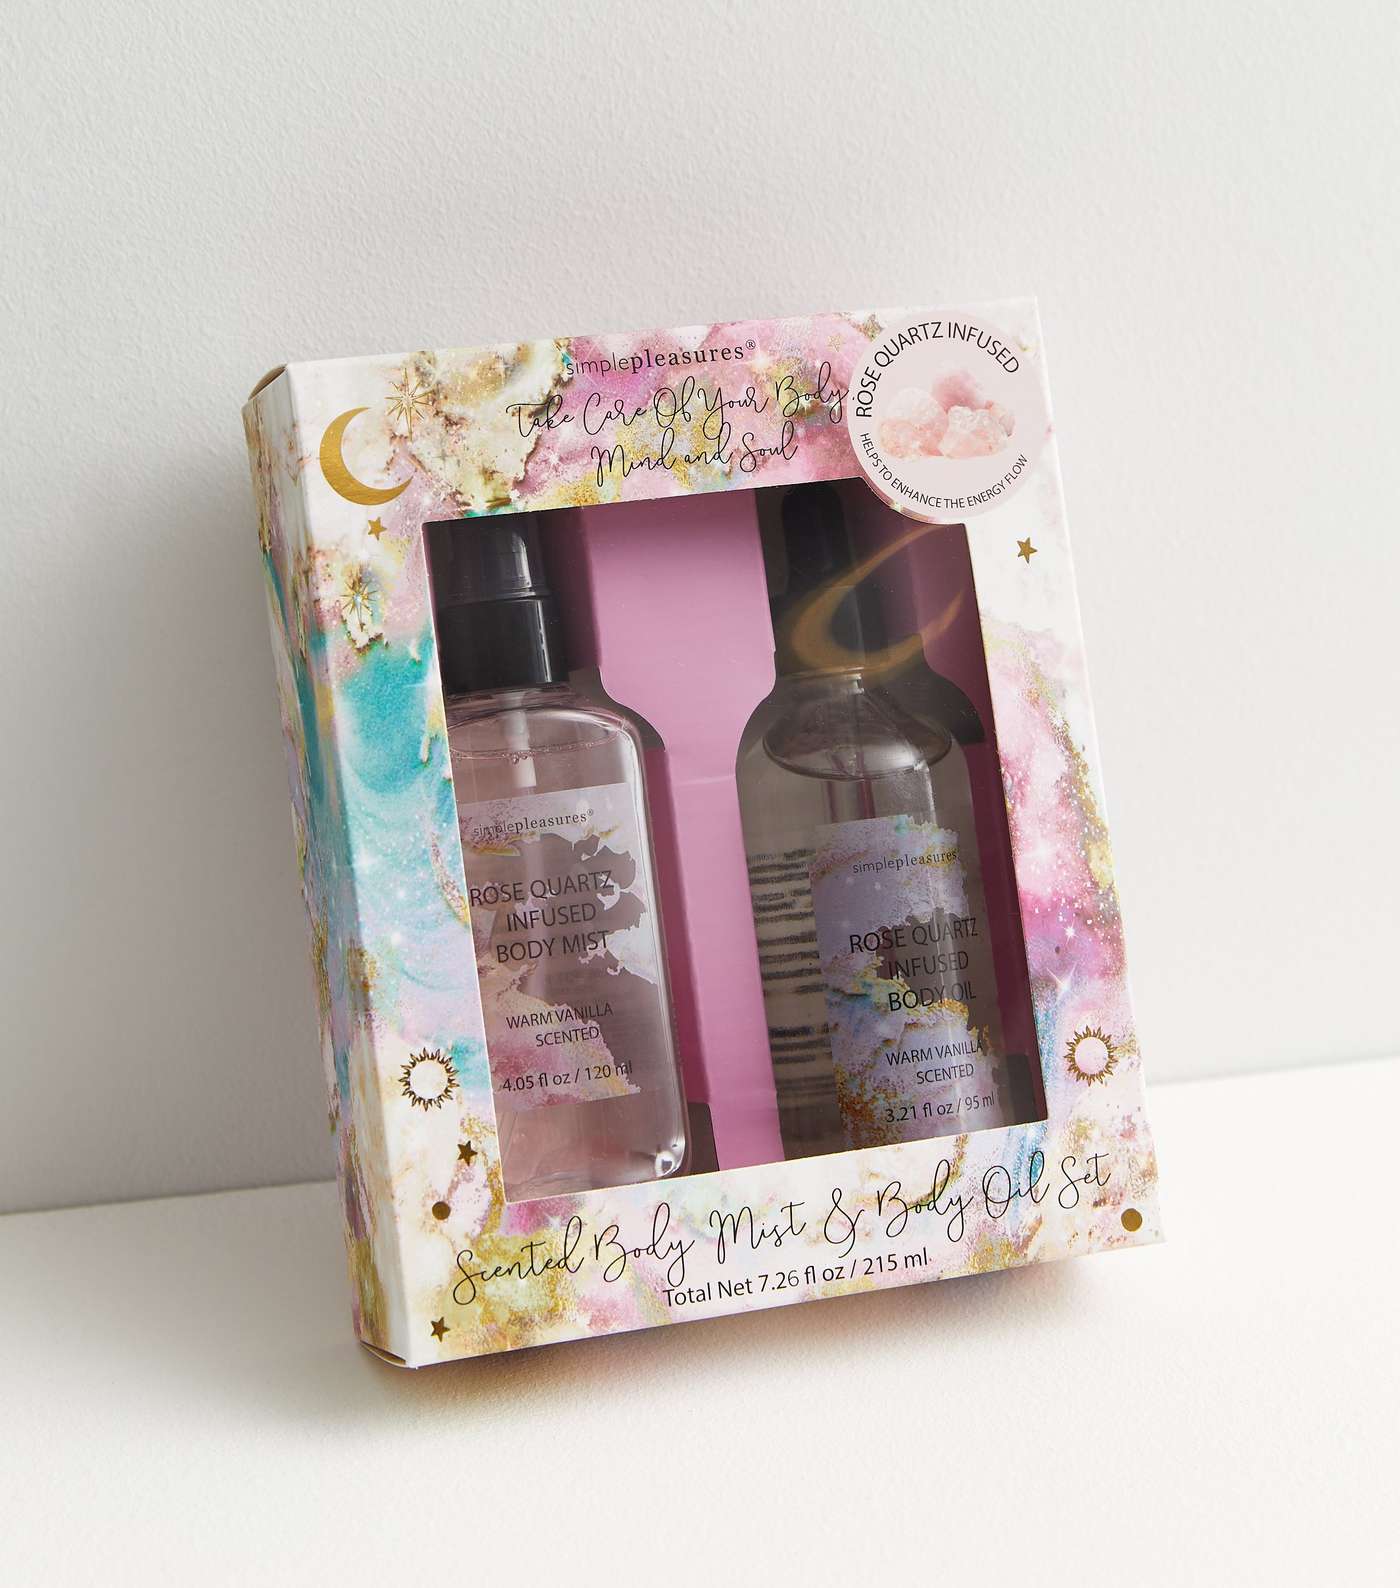 Simple Pleasures Scented Body Mist and Body Oil Set